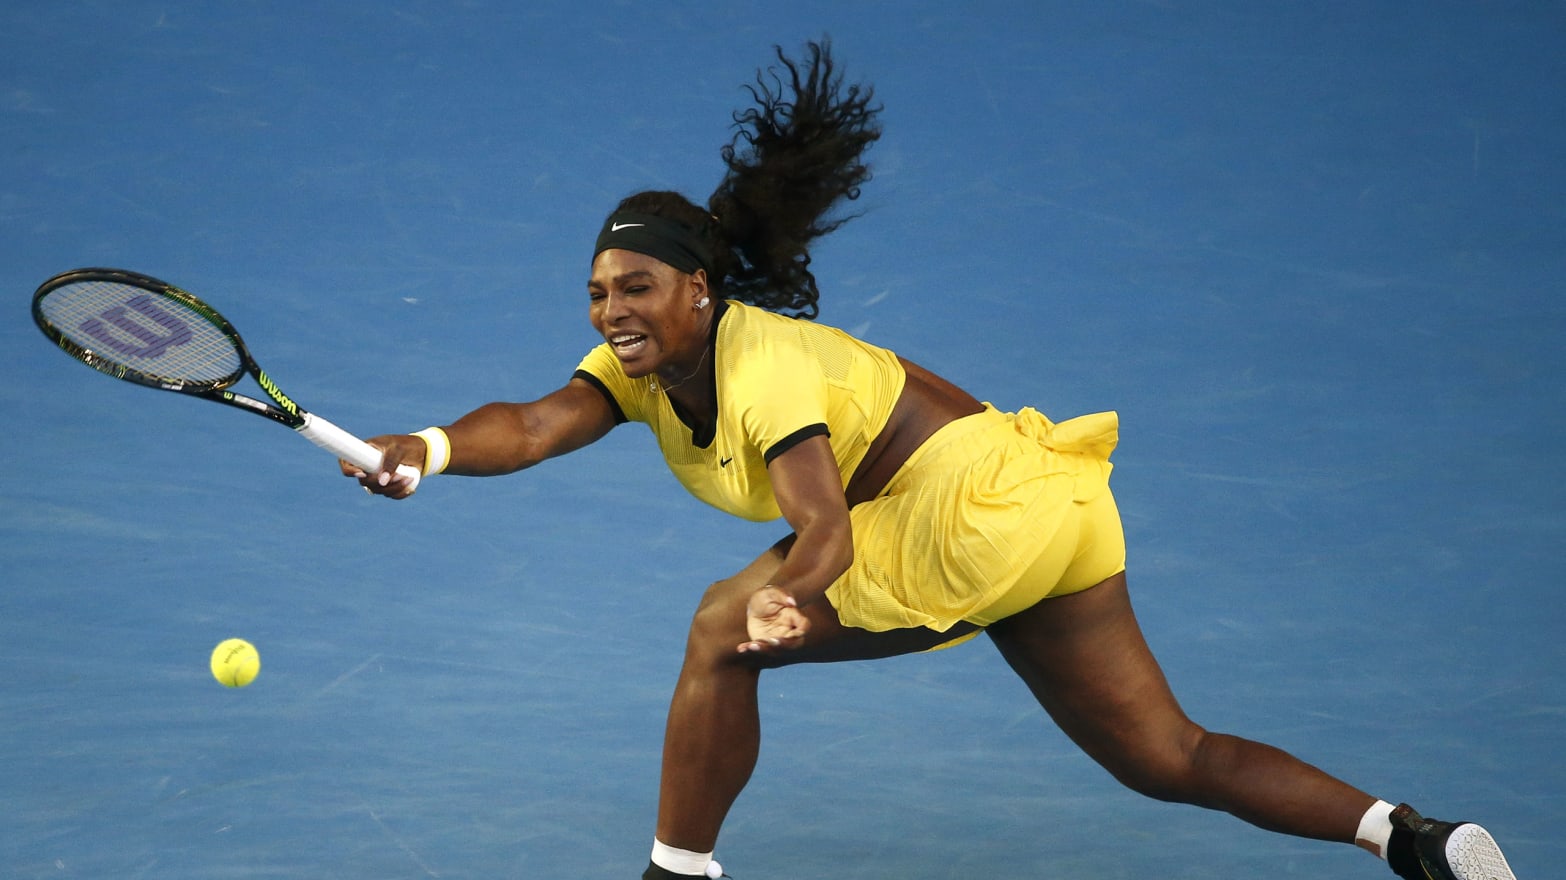 Is Serena Williams Underpaid? Women’s Tennis At Match Point